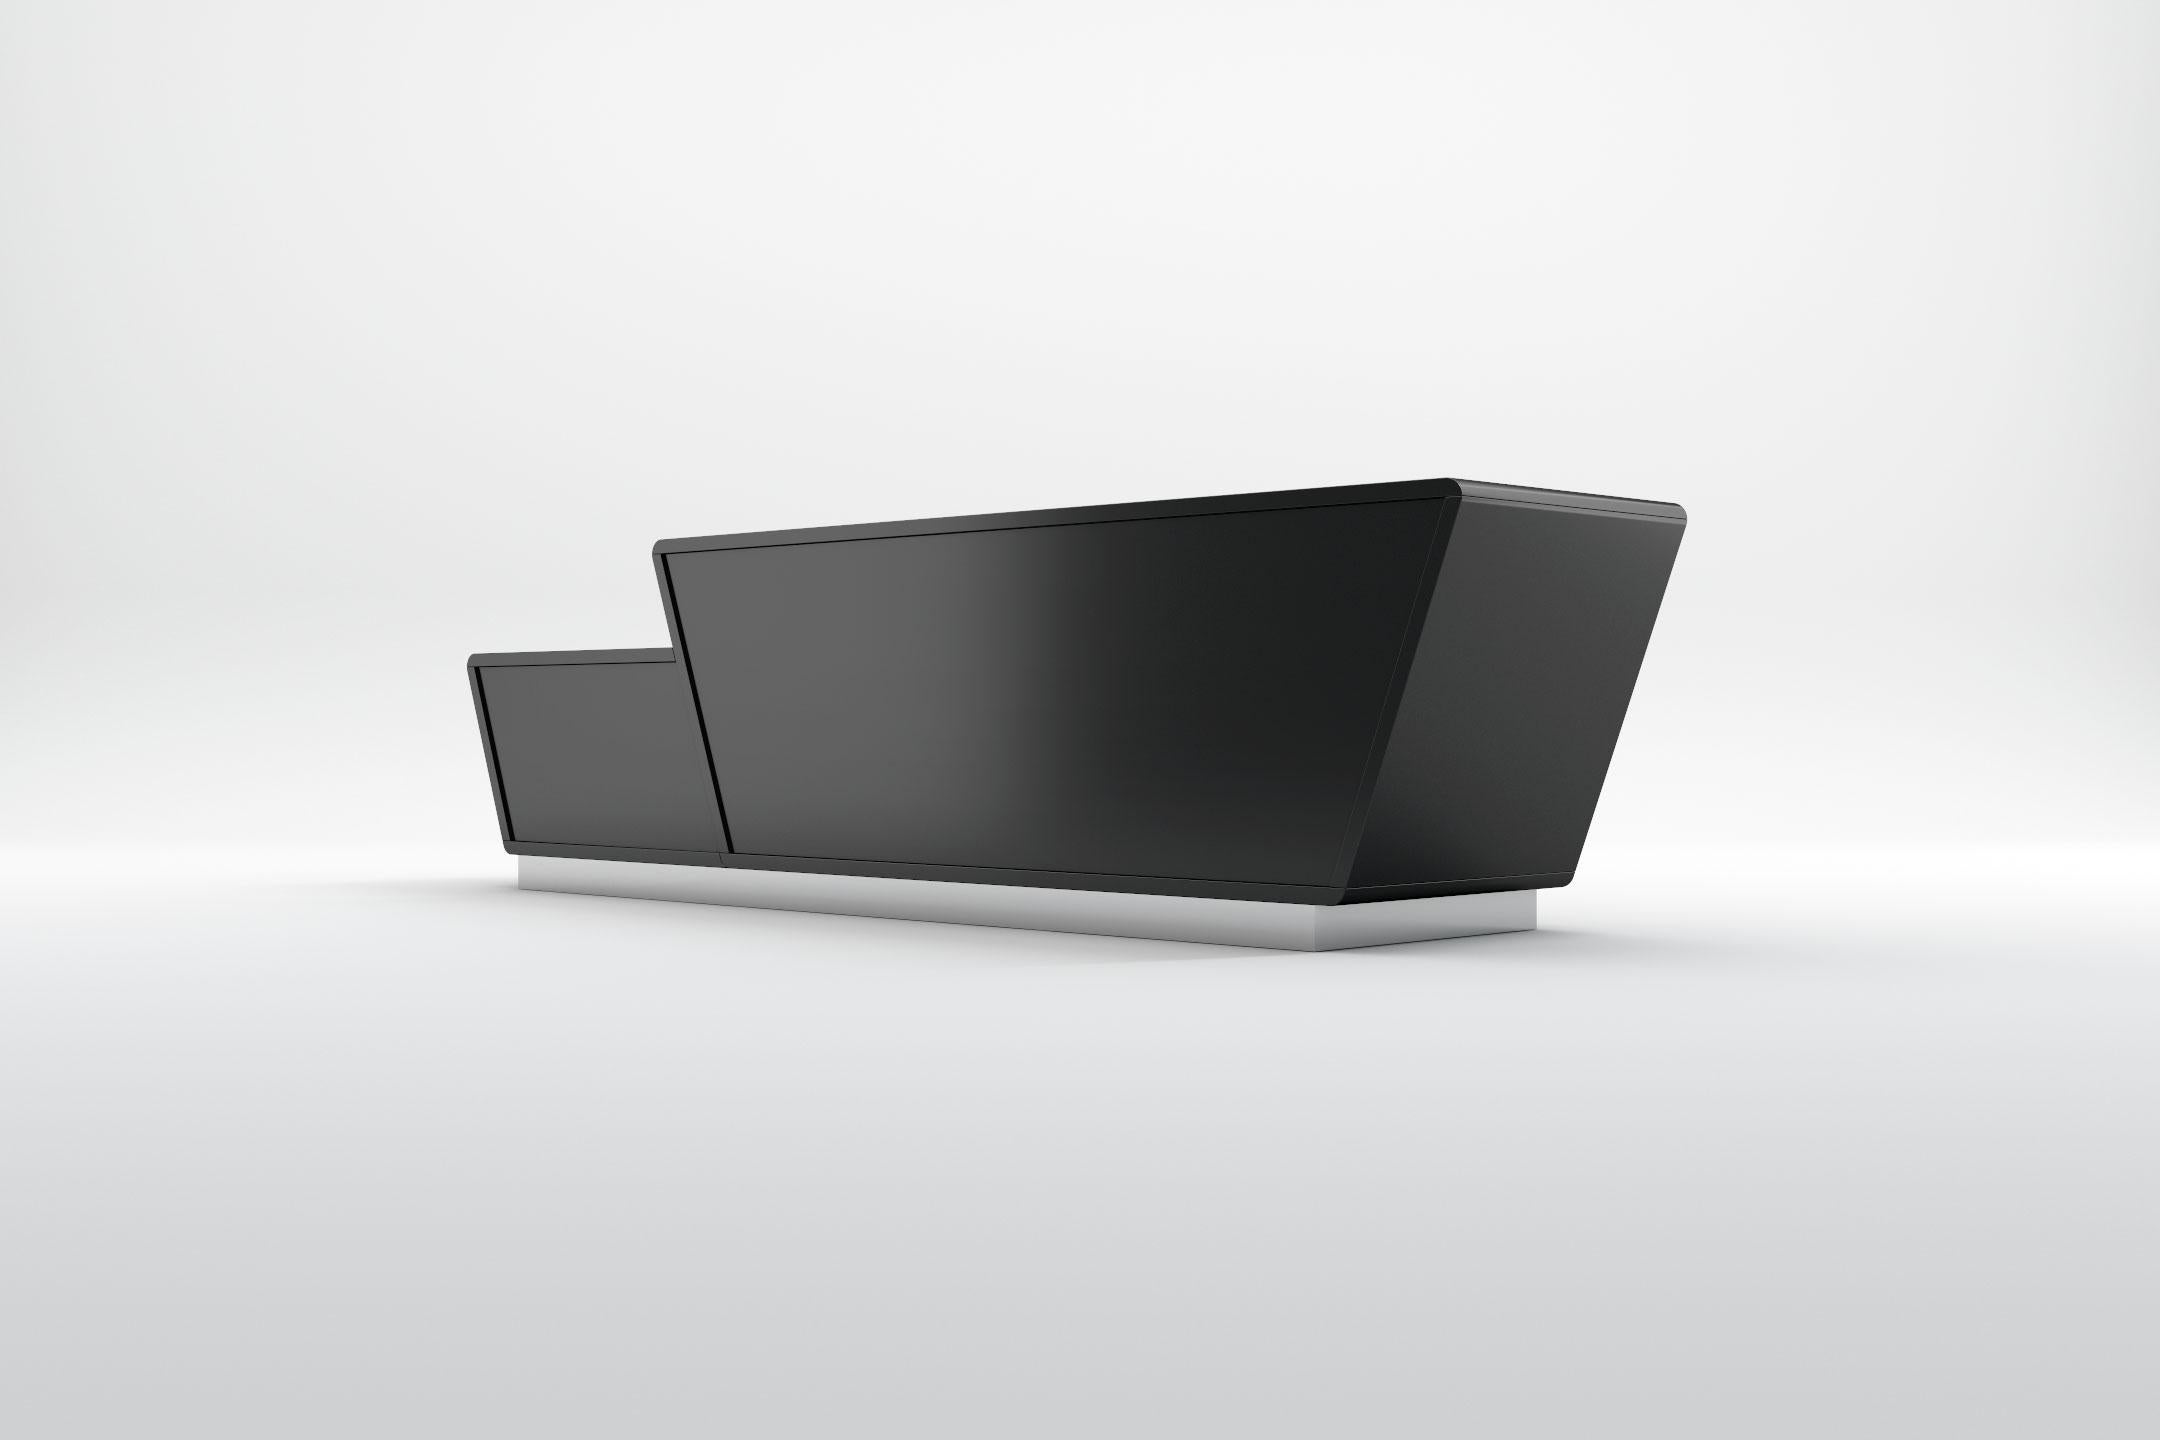 European Obsidian Medium TV Console - Modern Black Lacquered Console with Chromed Plinth For Sale